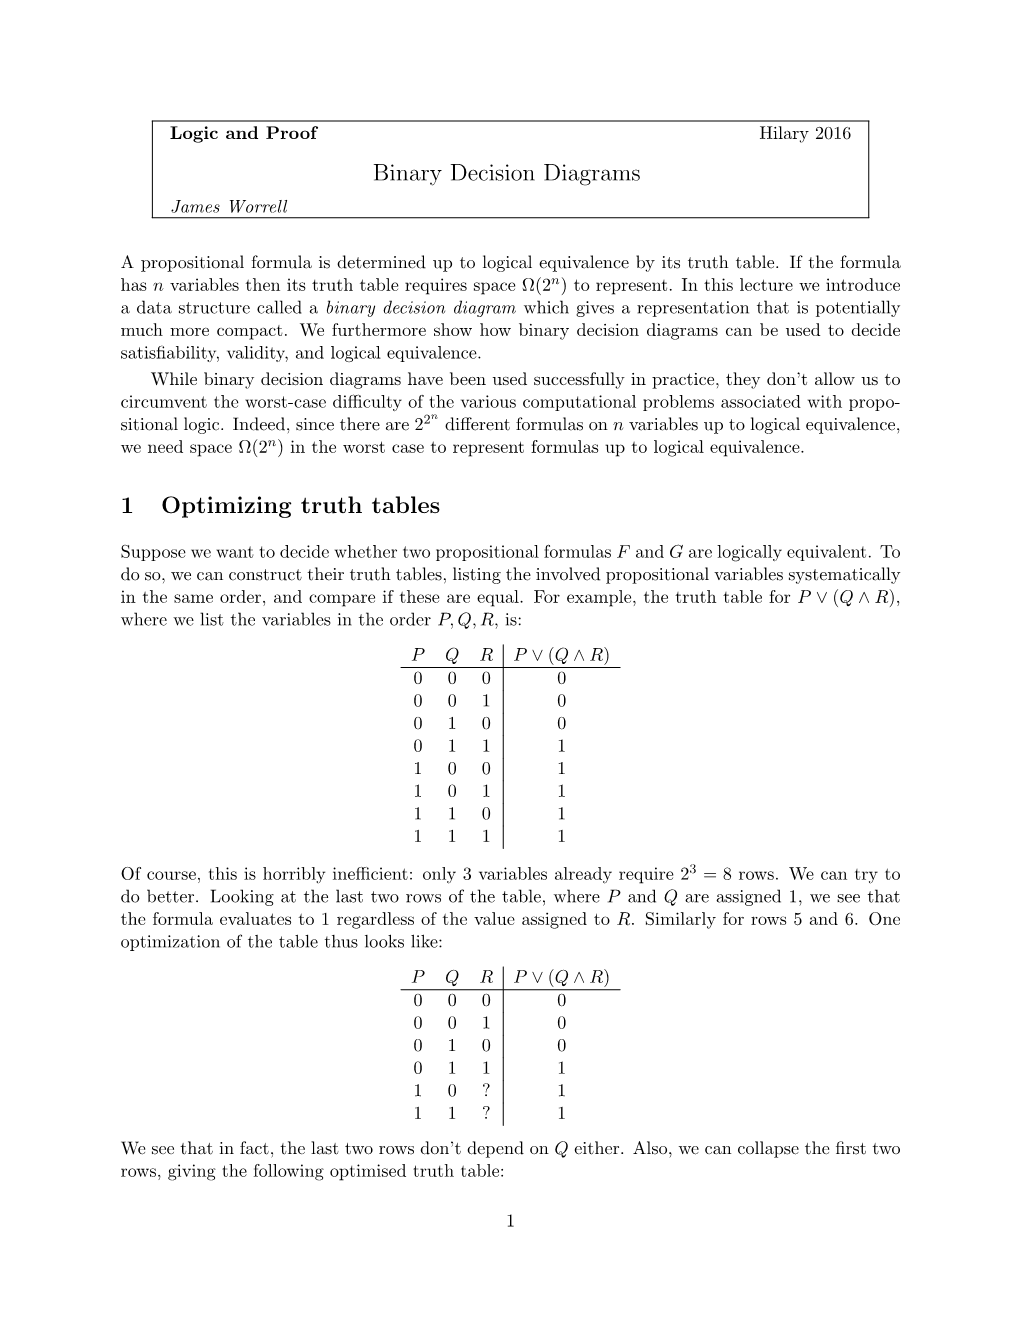 Binary Decision Diagrams 1 Optimizing Truth Tables